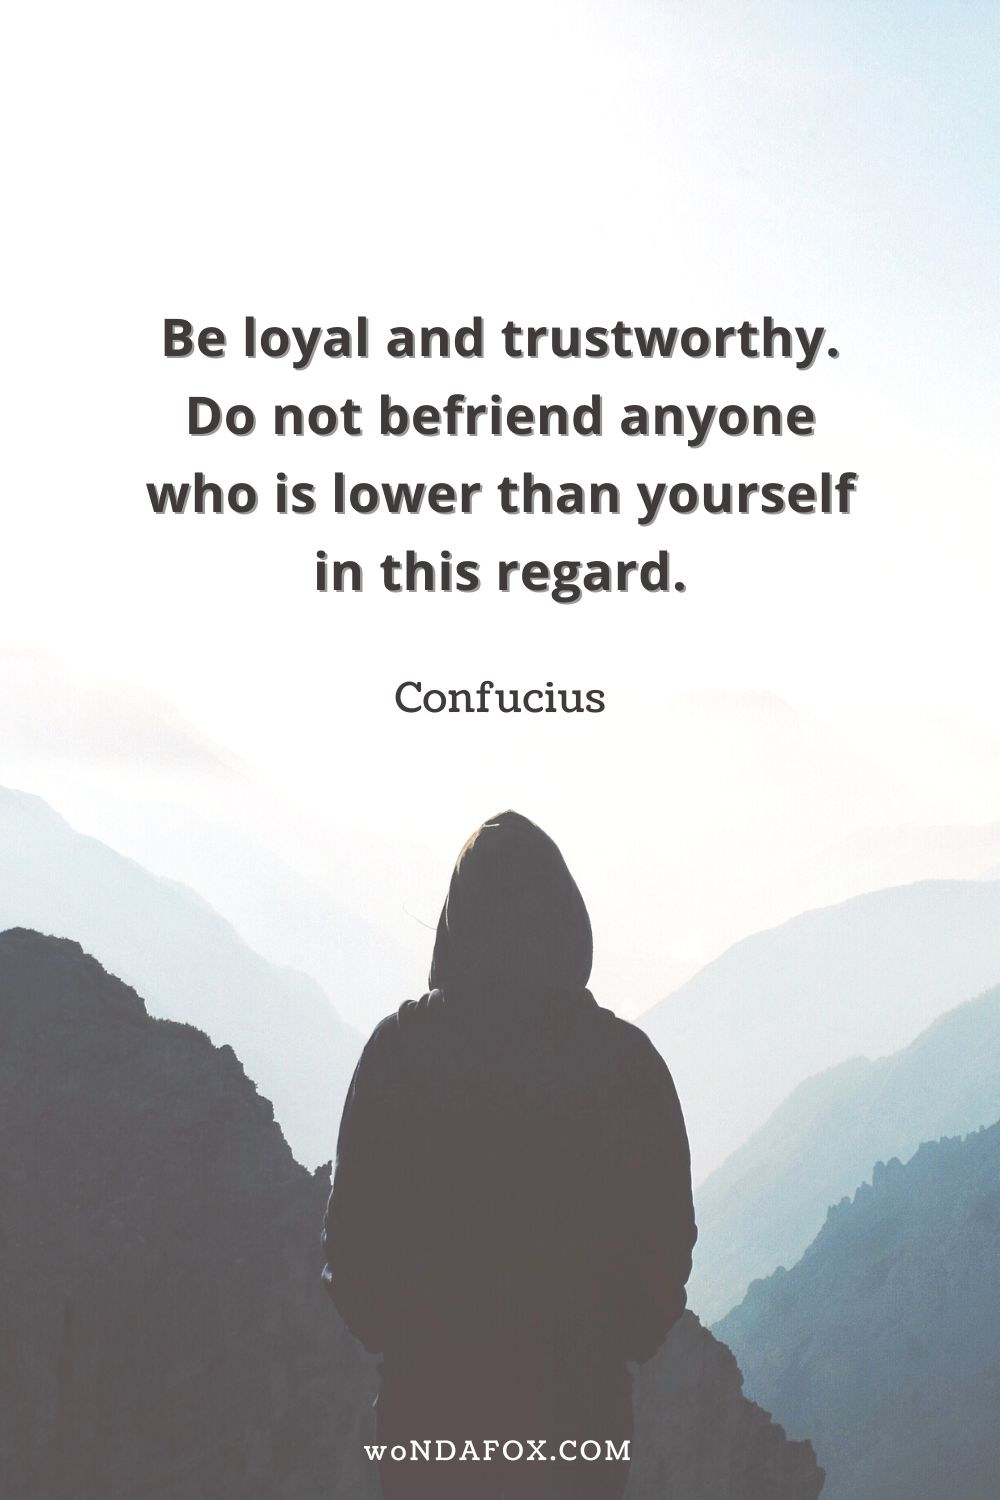 Be loyal and trustworthy. Do not befriend anyone who is lower than yourself in this regard.”